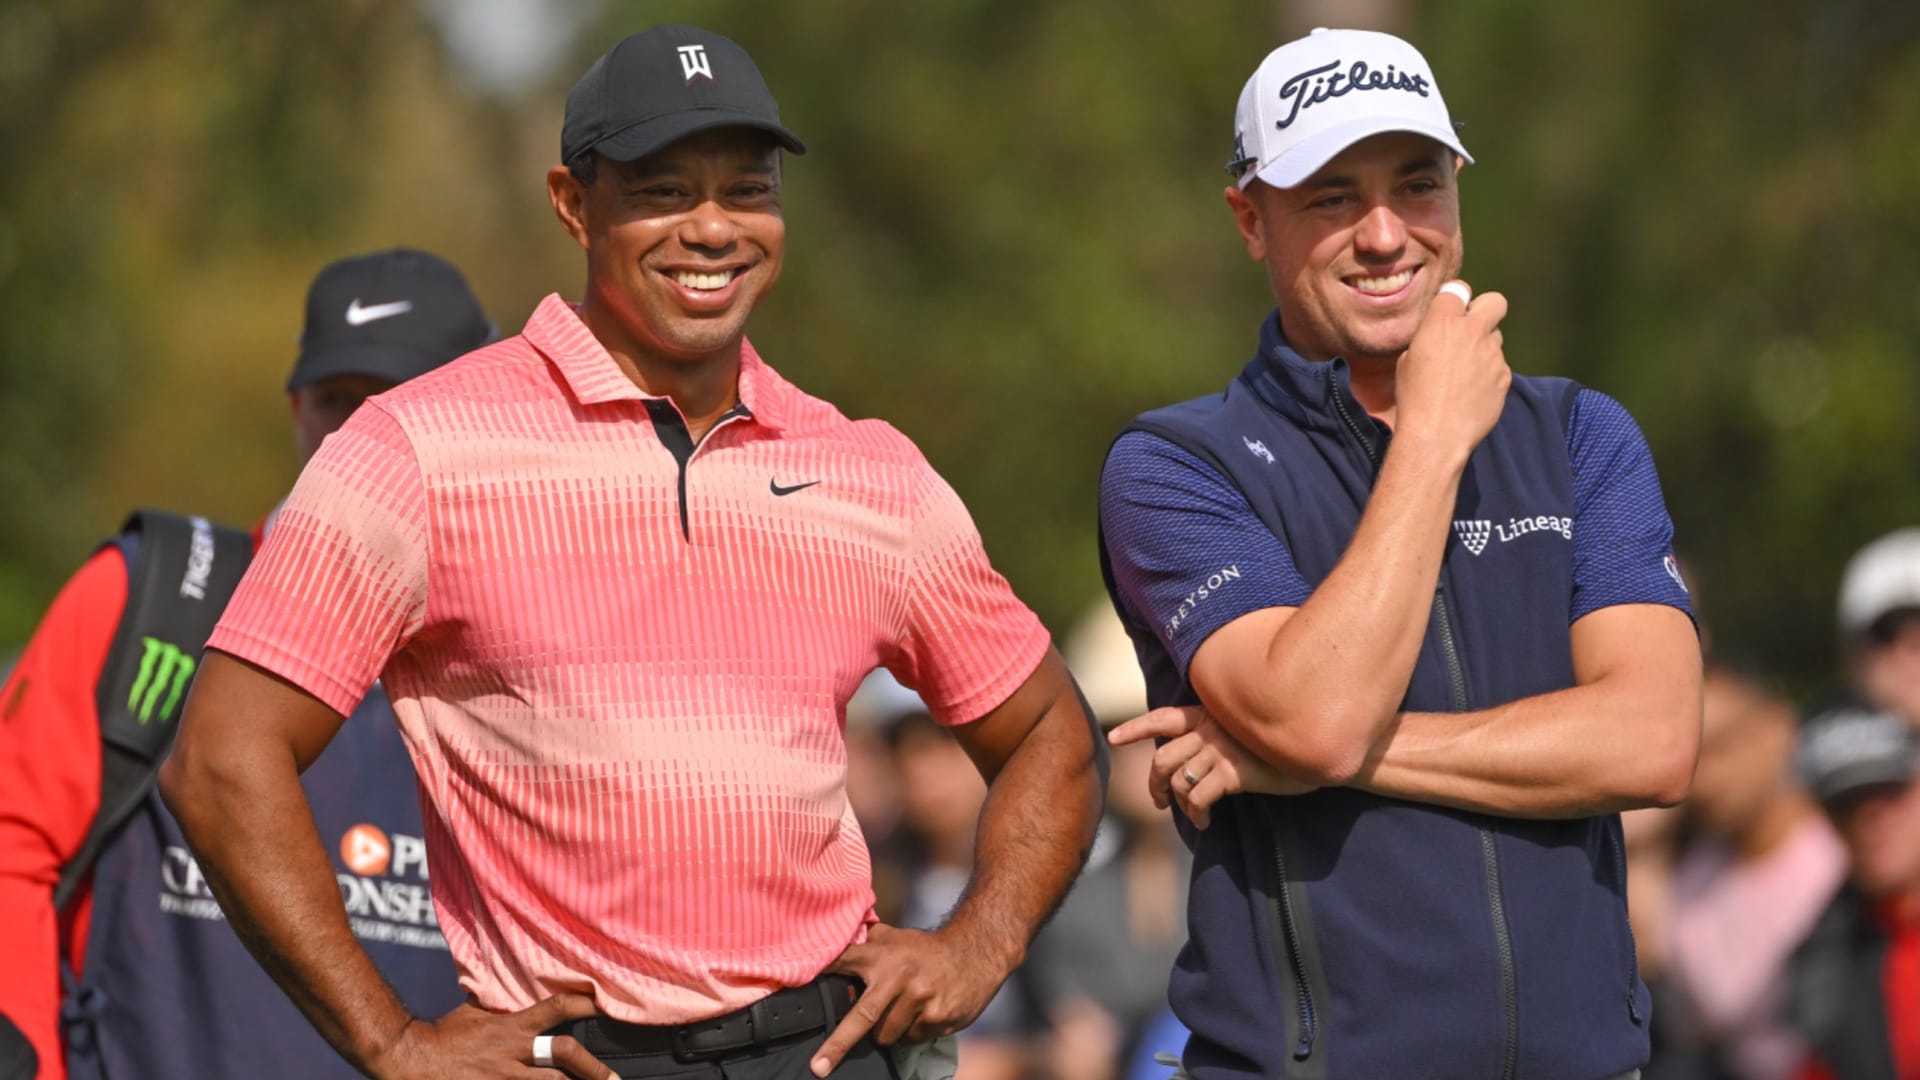 ‘Committee’ decision pairs Team Woods, Team Thomas together on Sunday at PNC